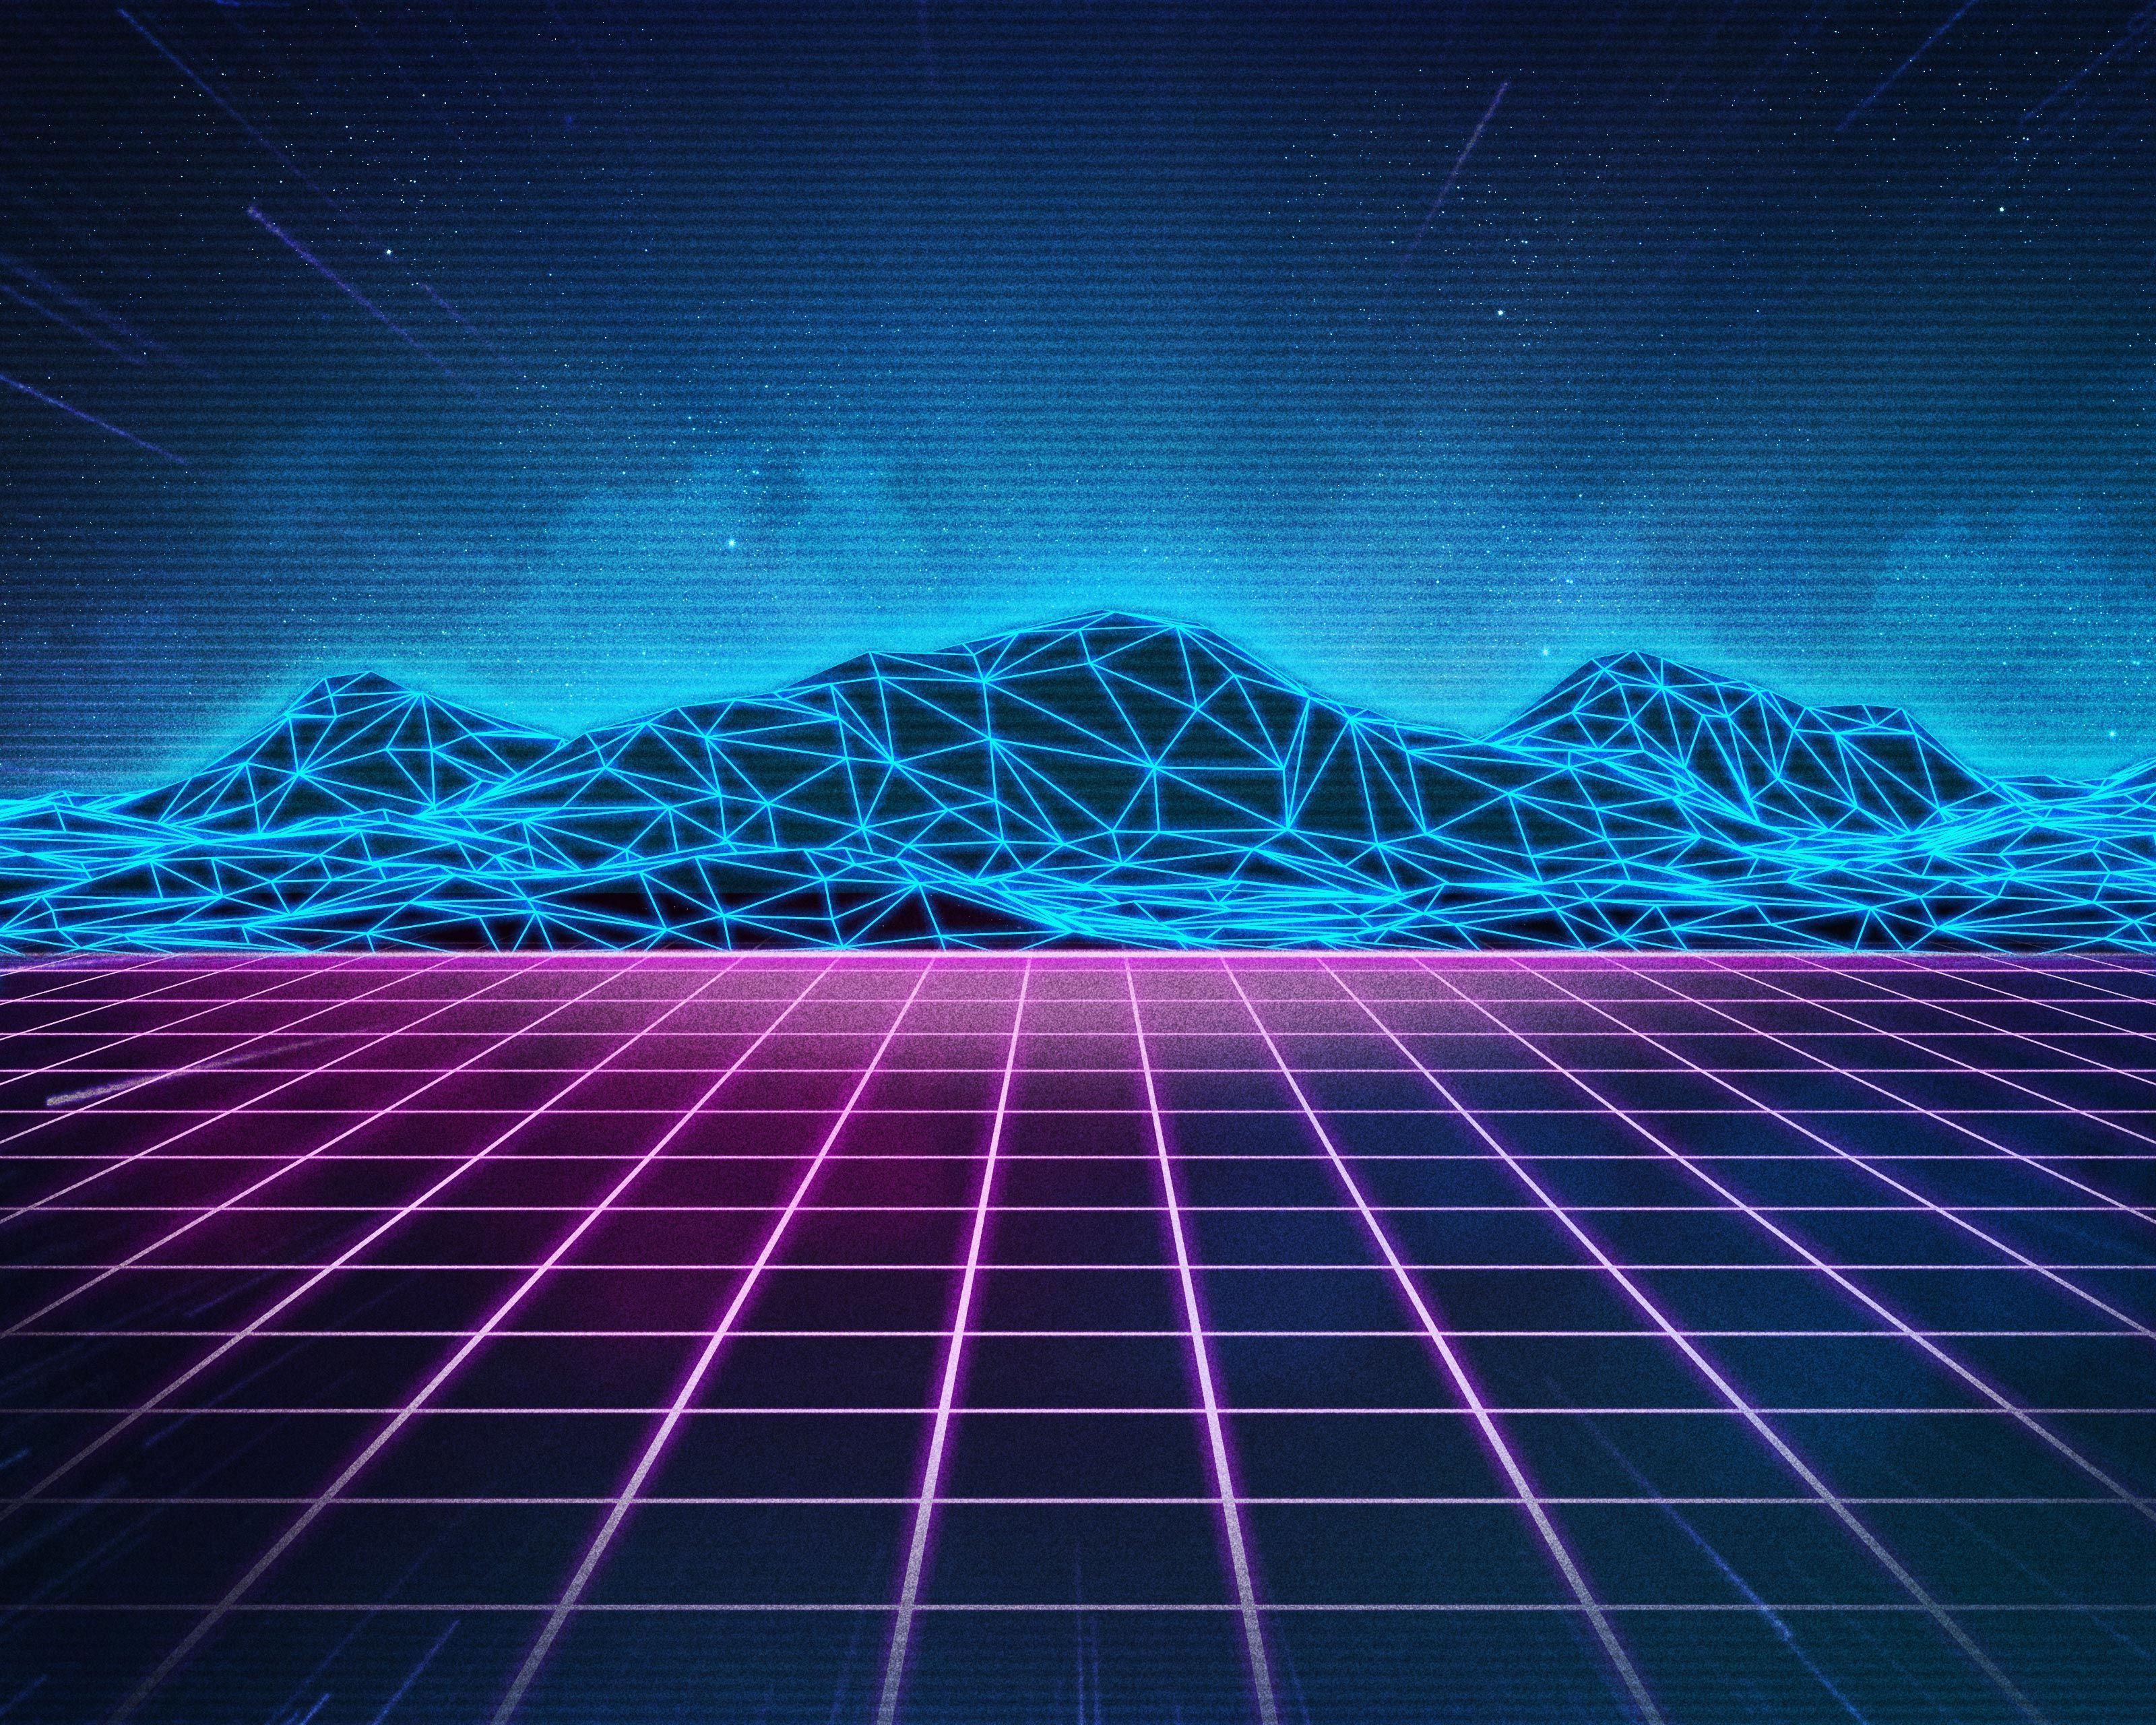 80s Wallpaper Photos Download The BEST Free 80s Wallpaper Stock Photos   HD Images